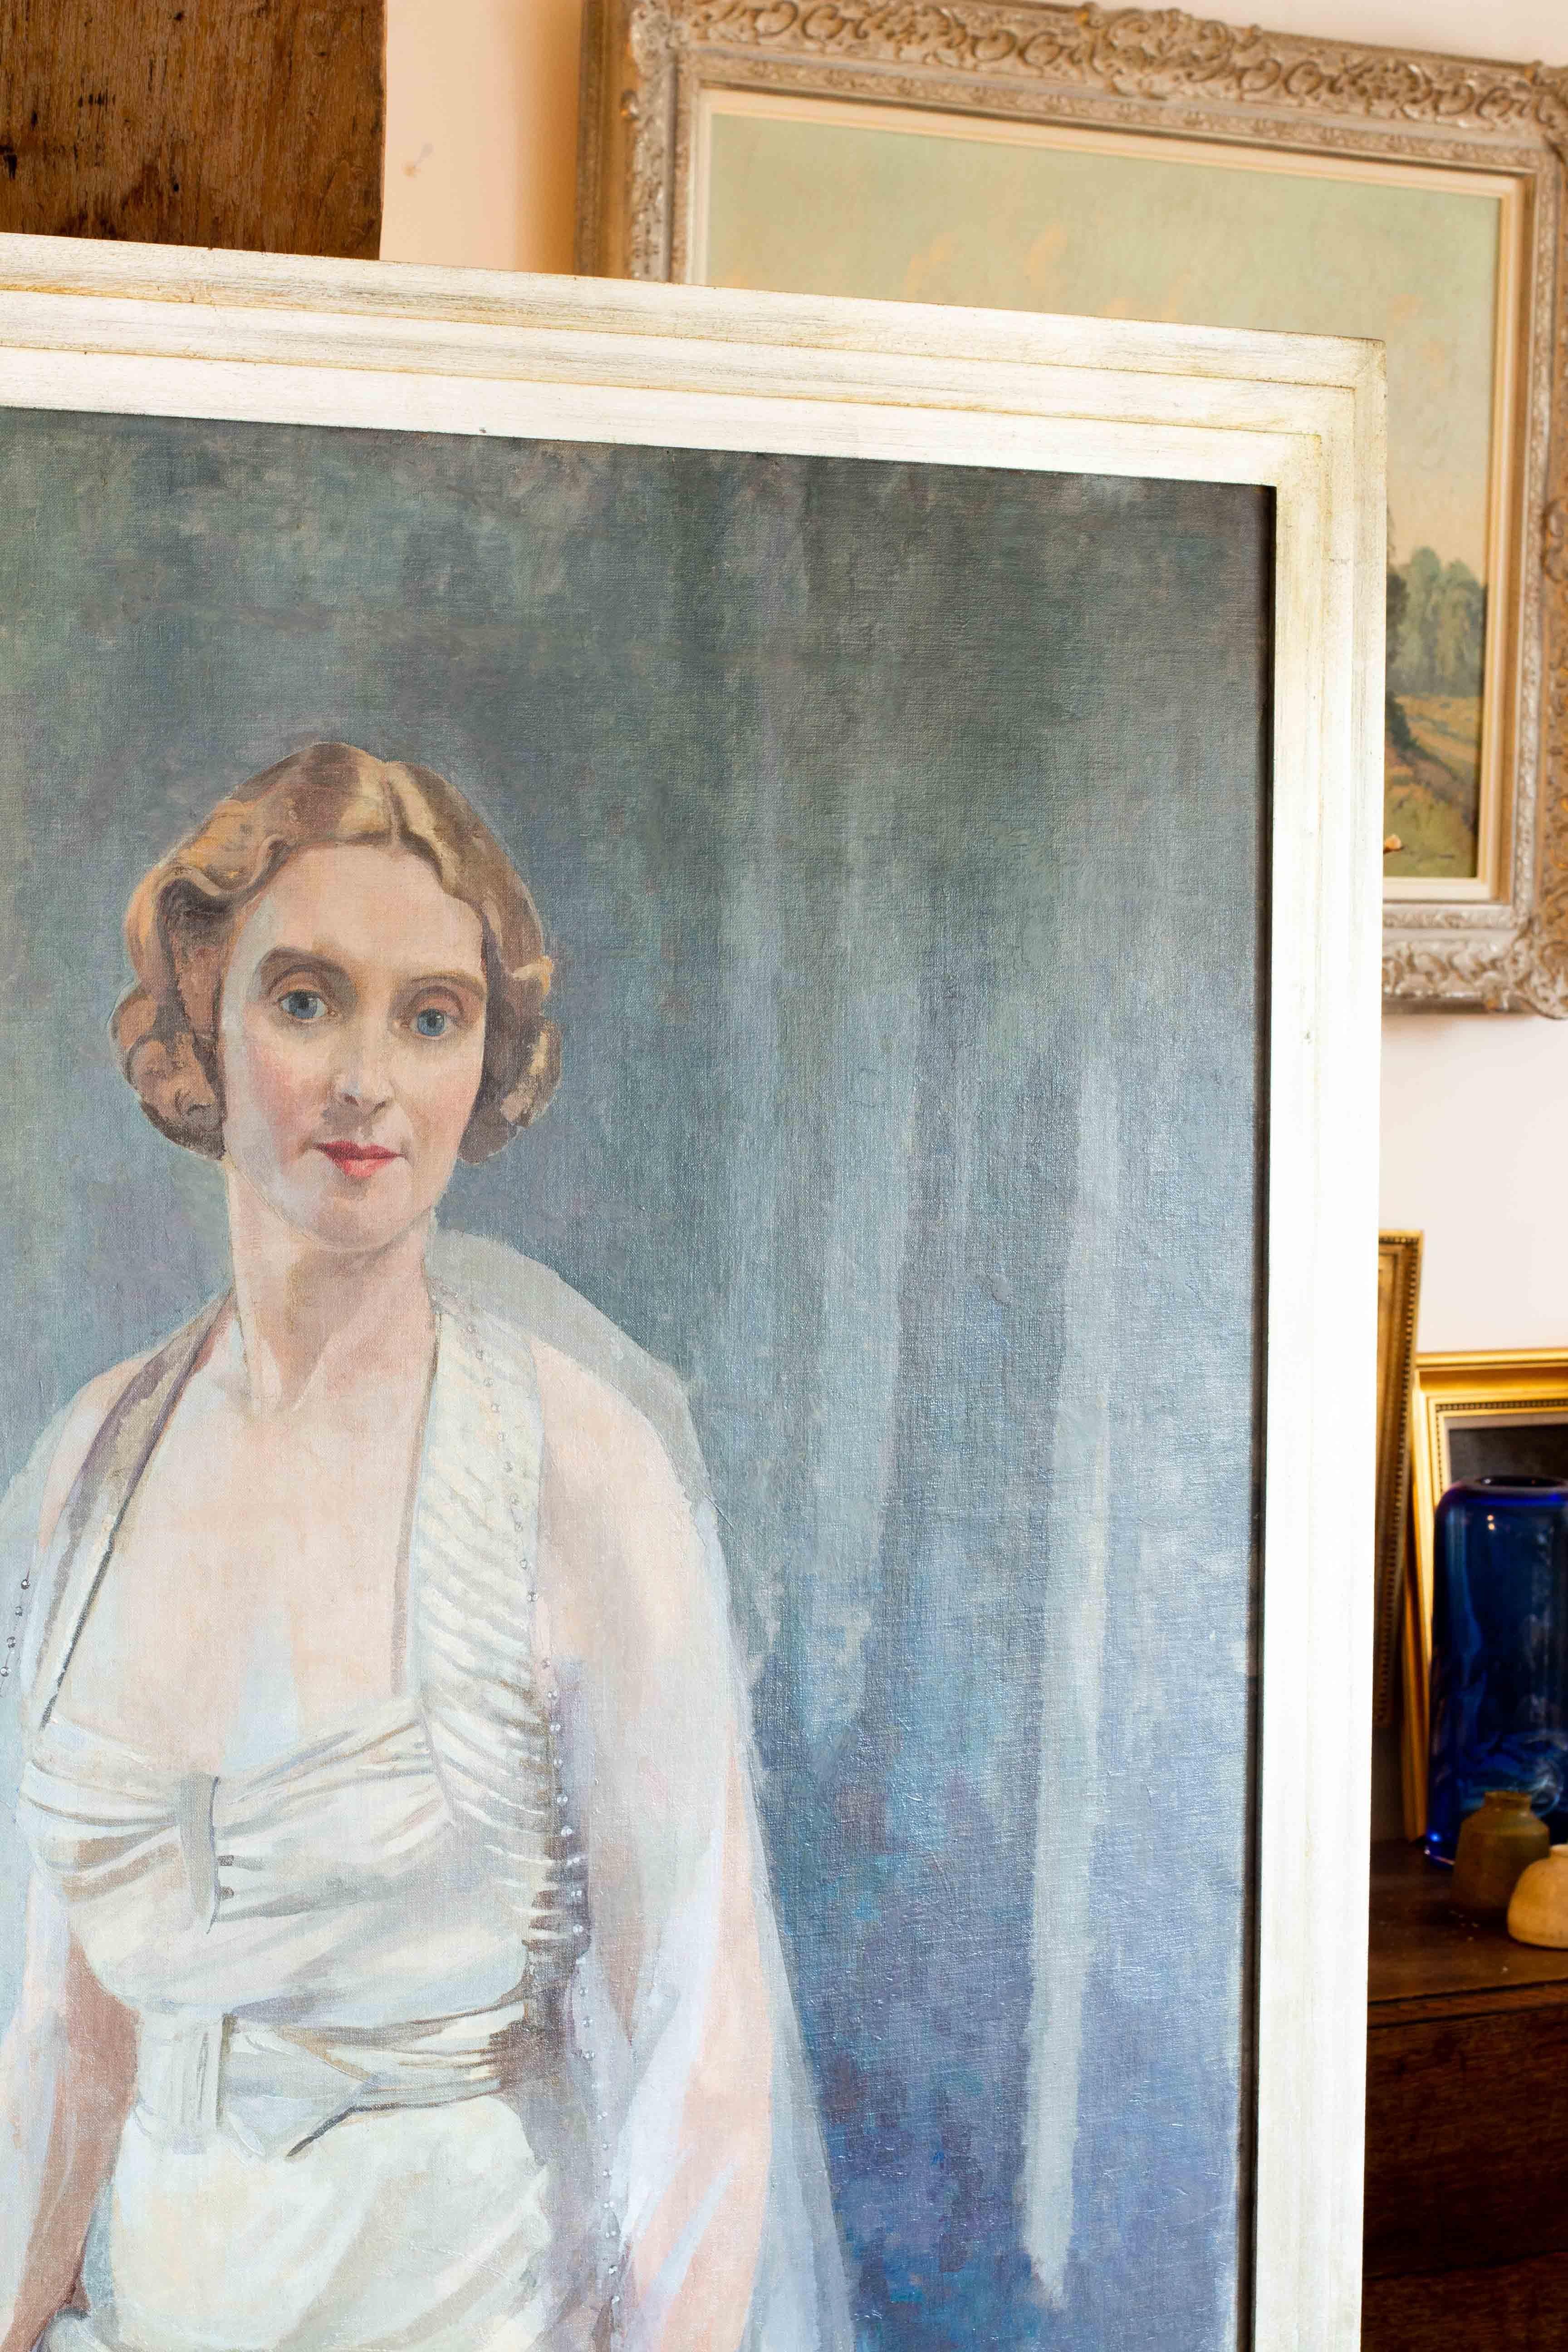 20th Century British portrait of a society lady thought to be Dame Anna Neagle - Painting by Unknown